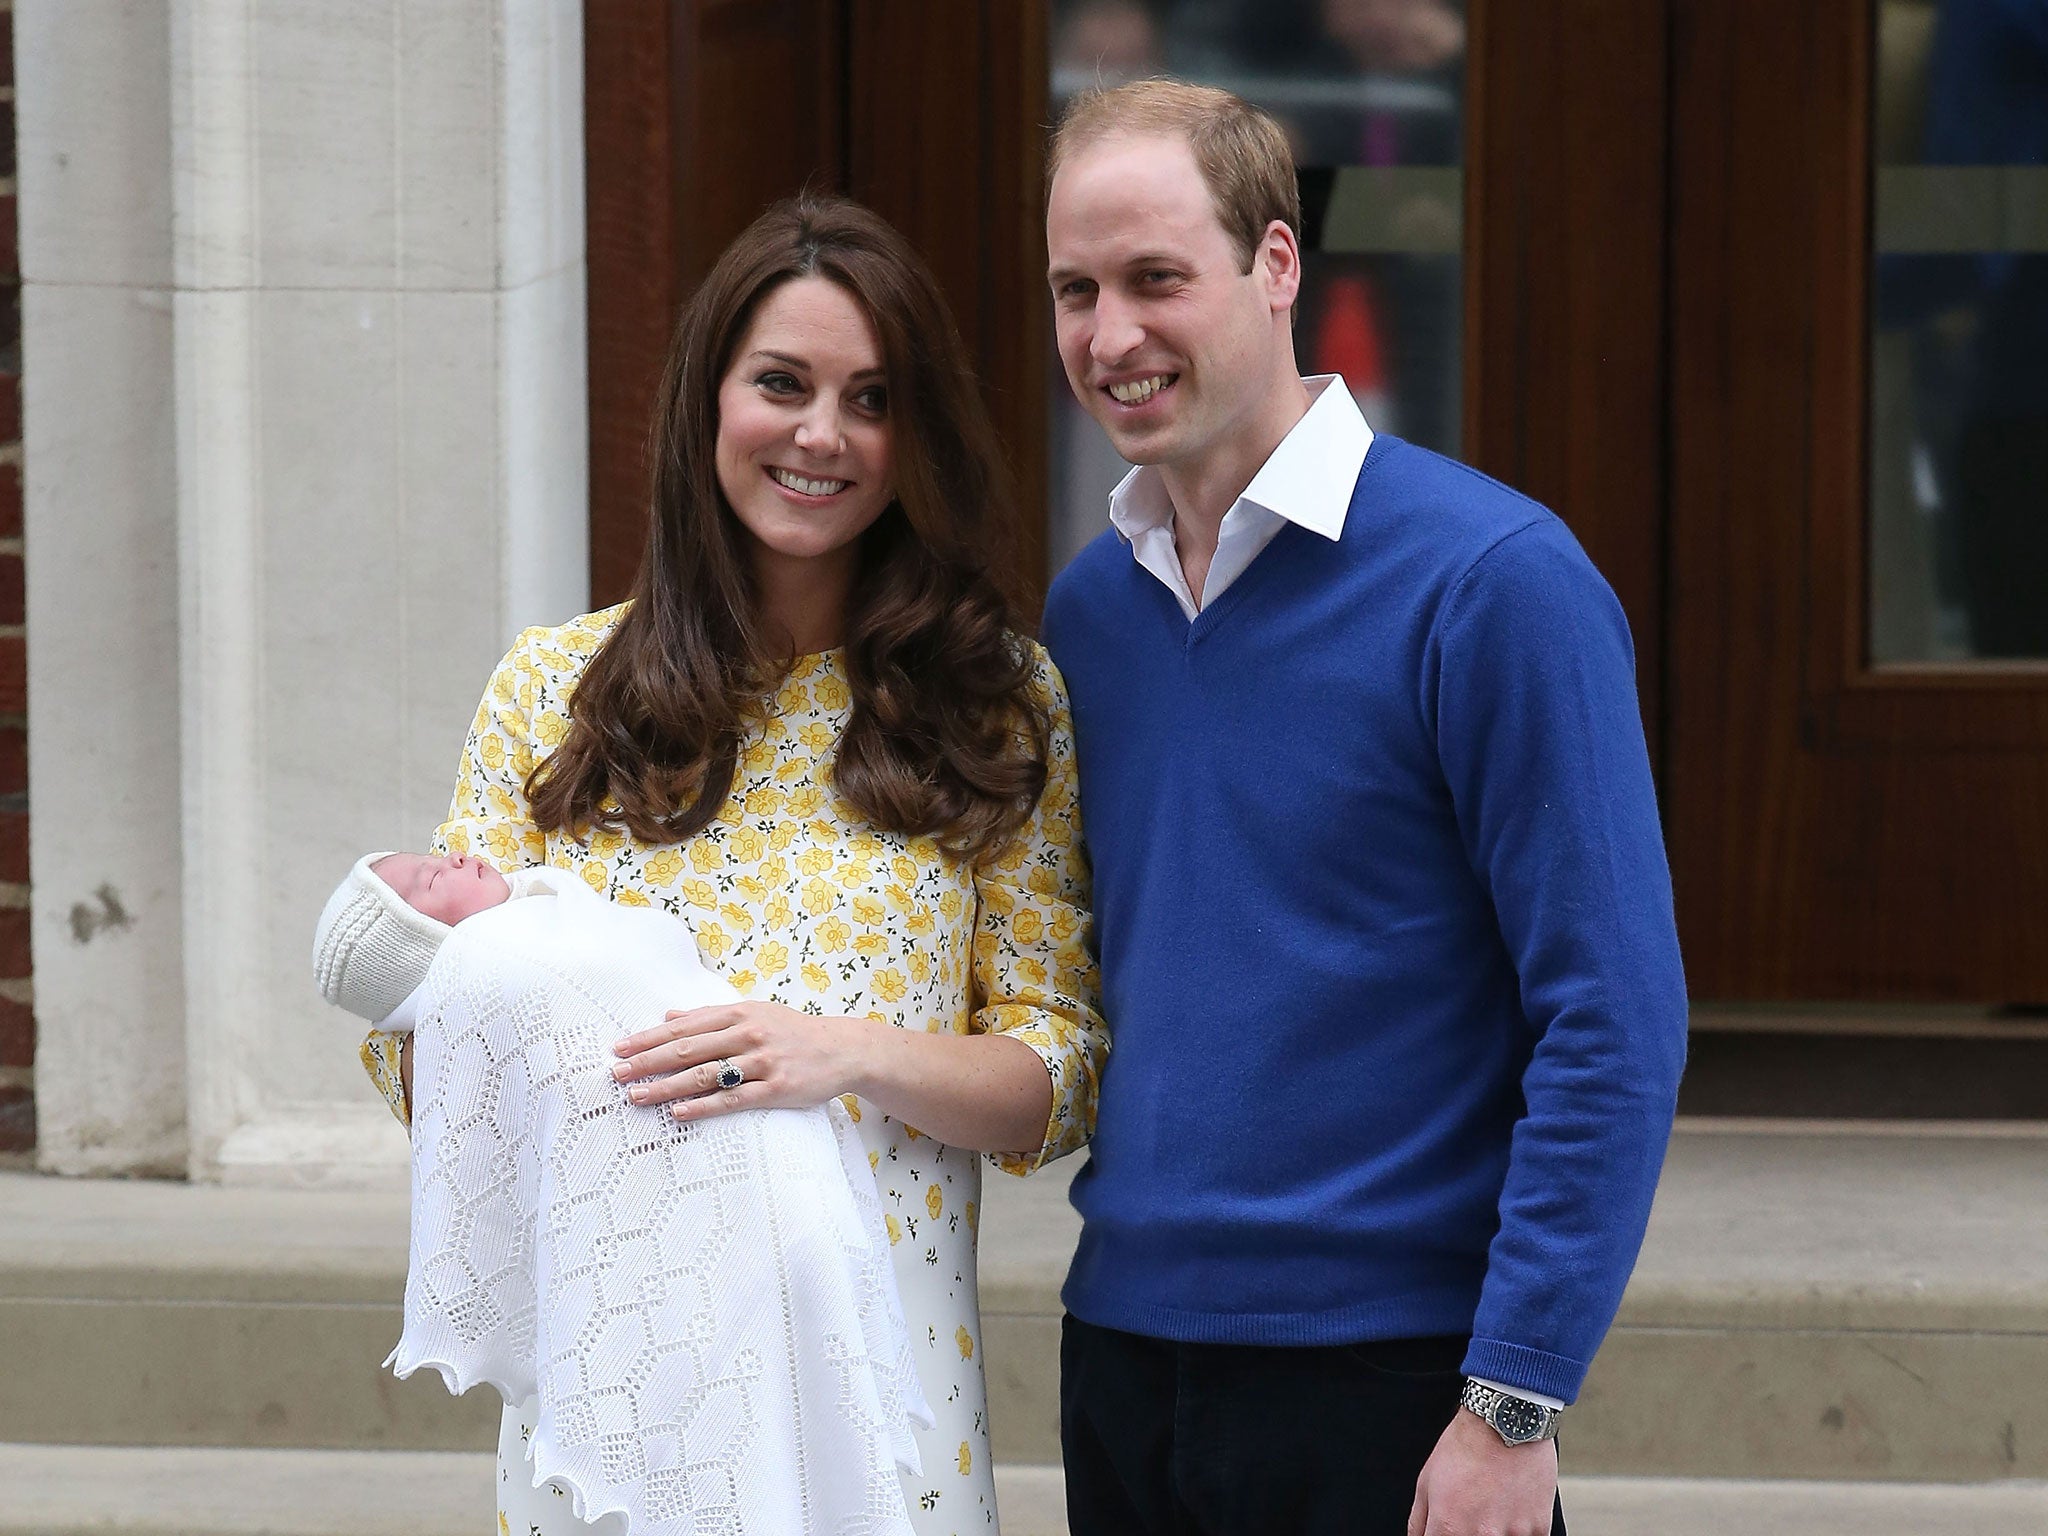 The Duke and Duchess of Cambridge with their baby daughter Charlotte Elizabeth Diana